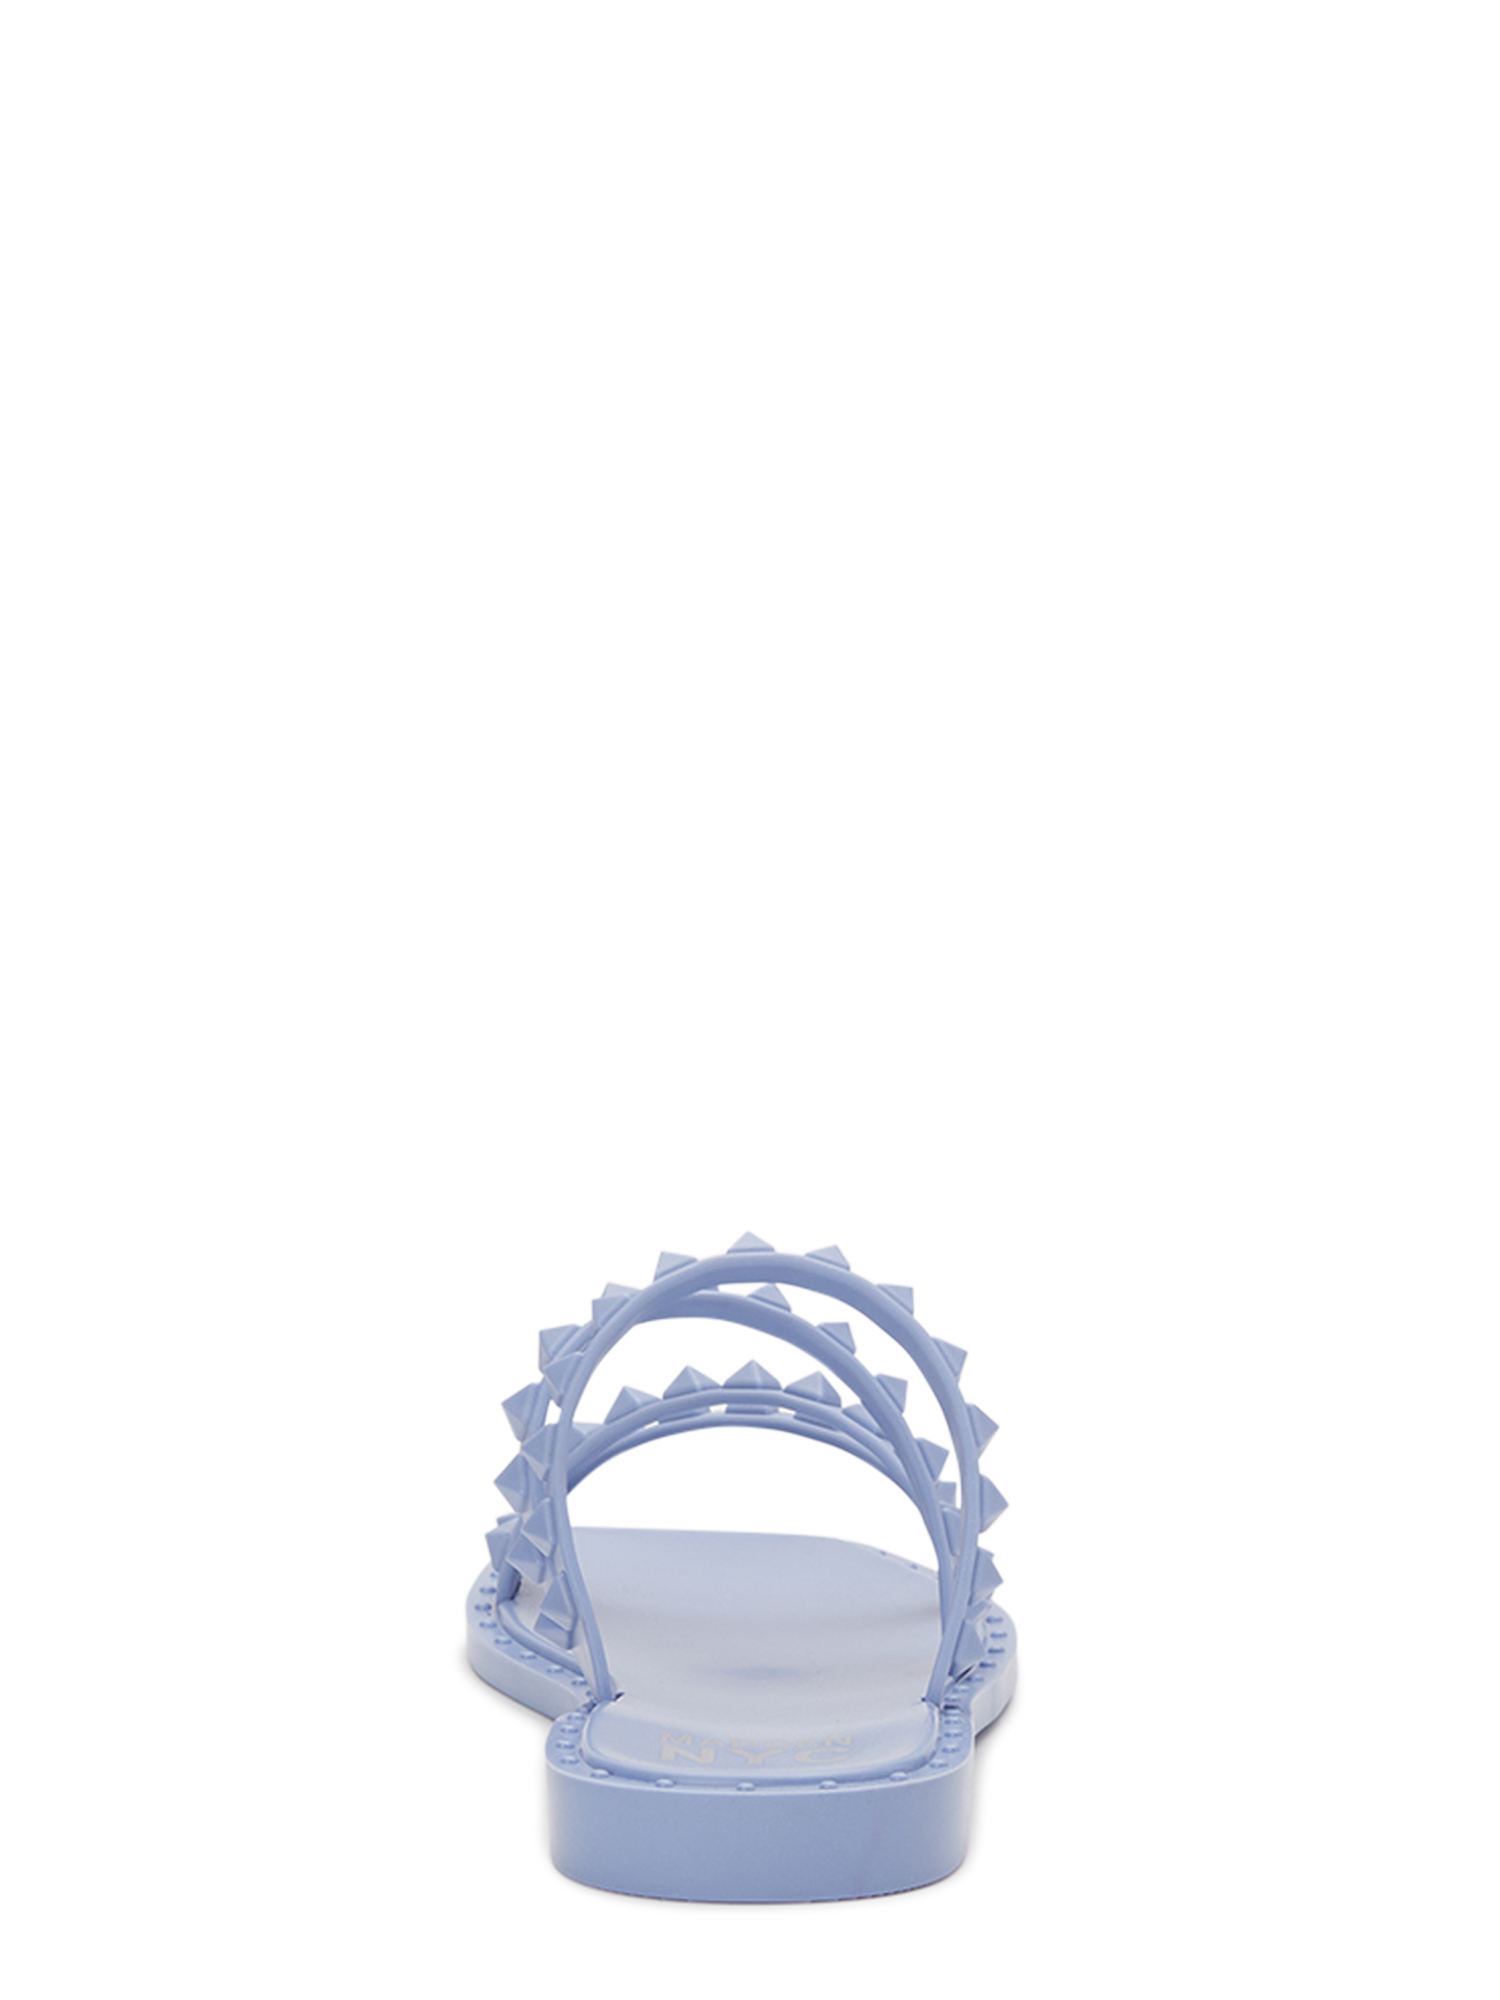 Madden NYC Women's Studded Strappy Jelly Slide Sandals - image 3 of 5